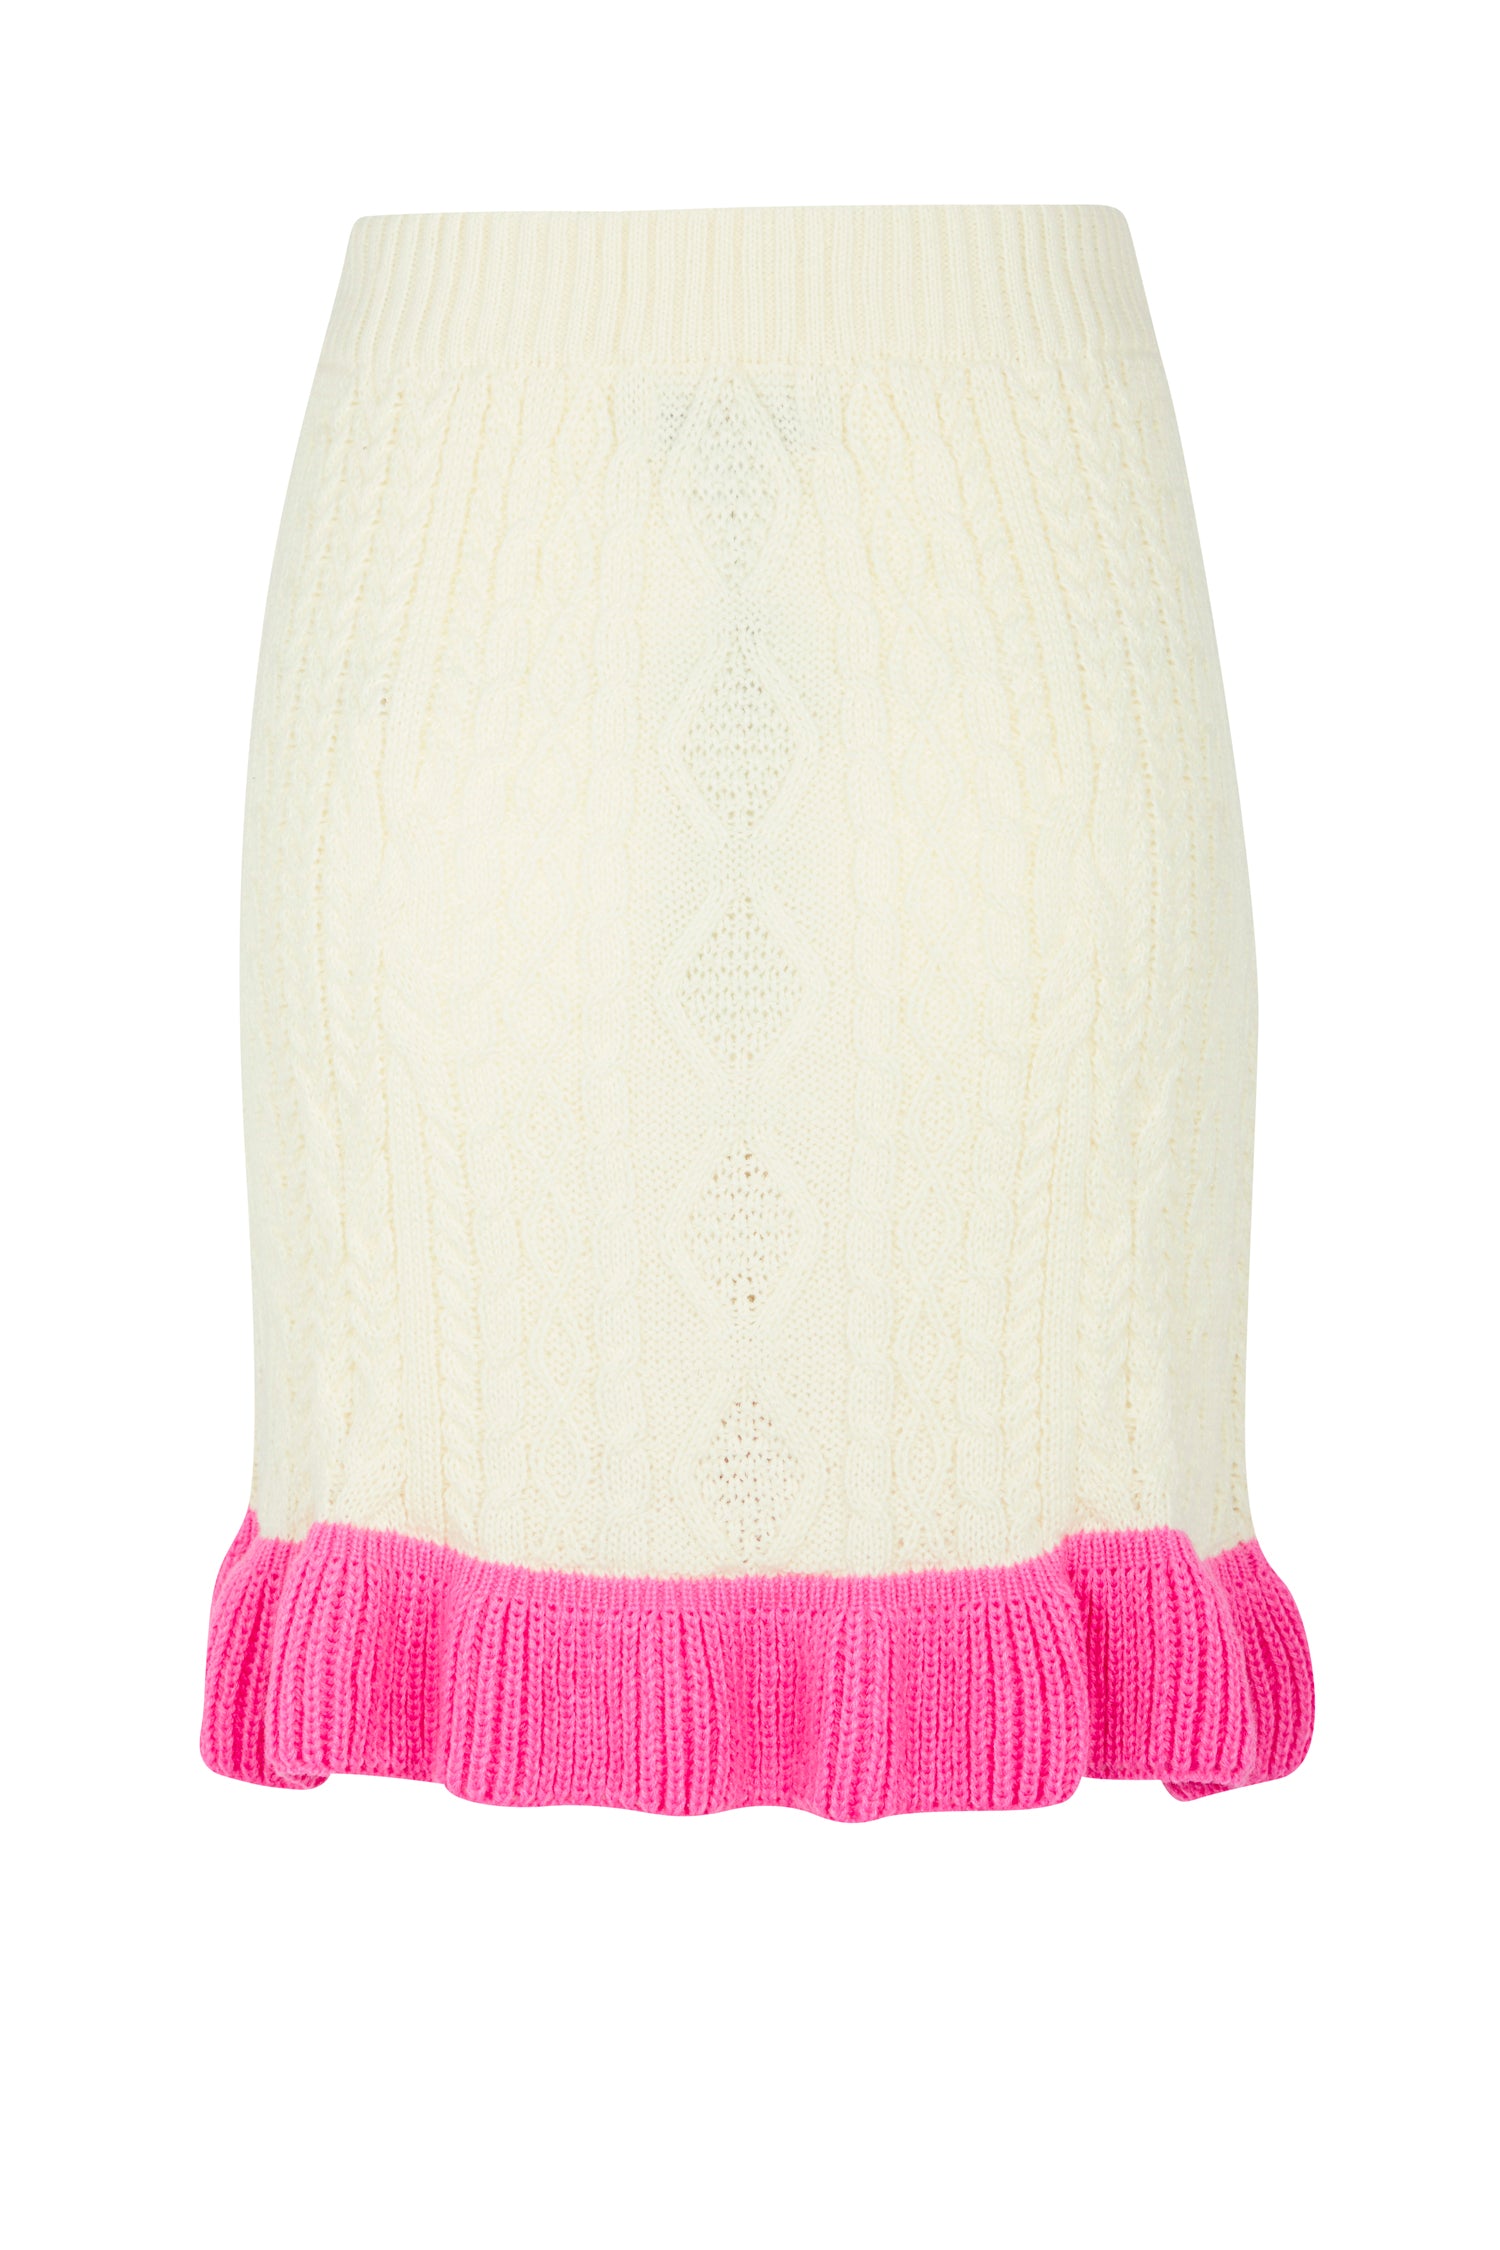 Cream Ruffle Cable Knit Skirt